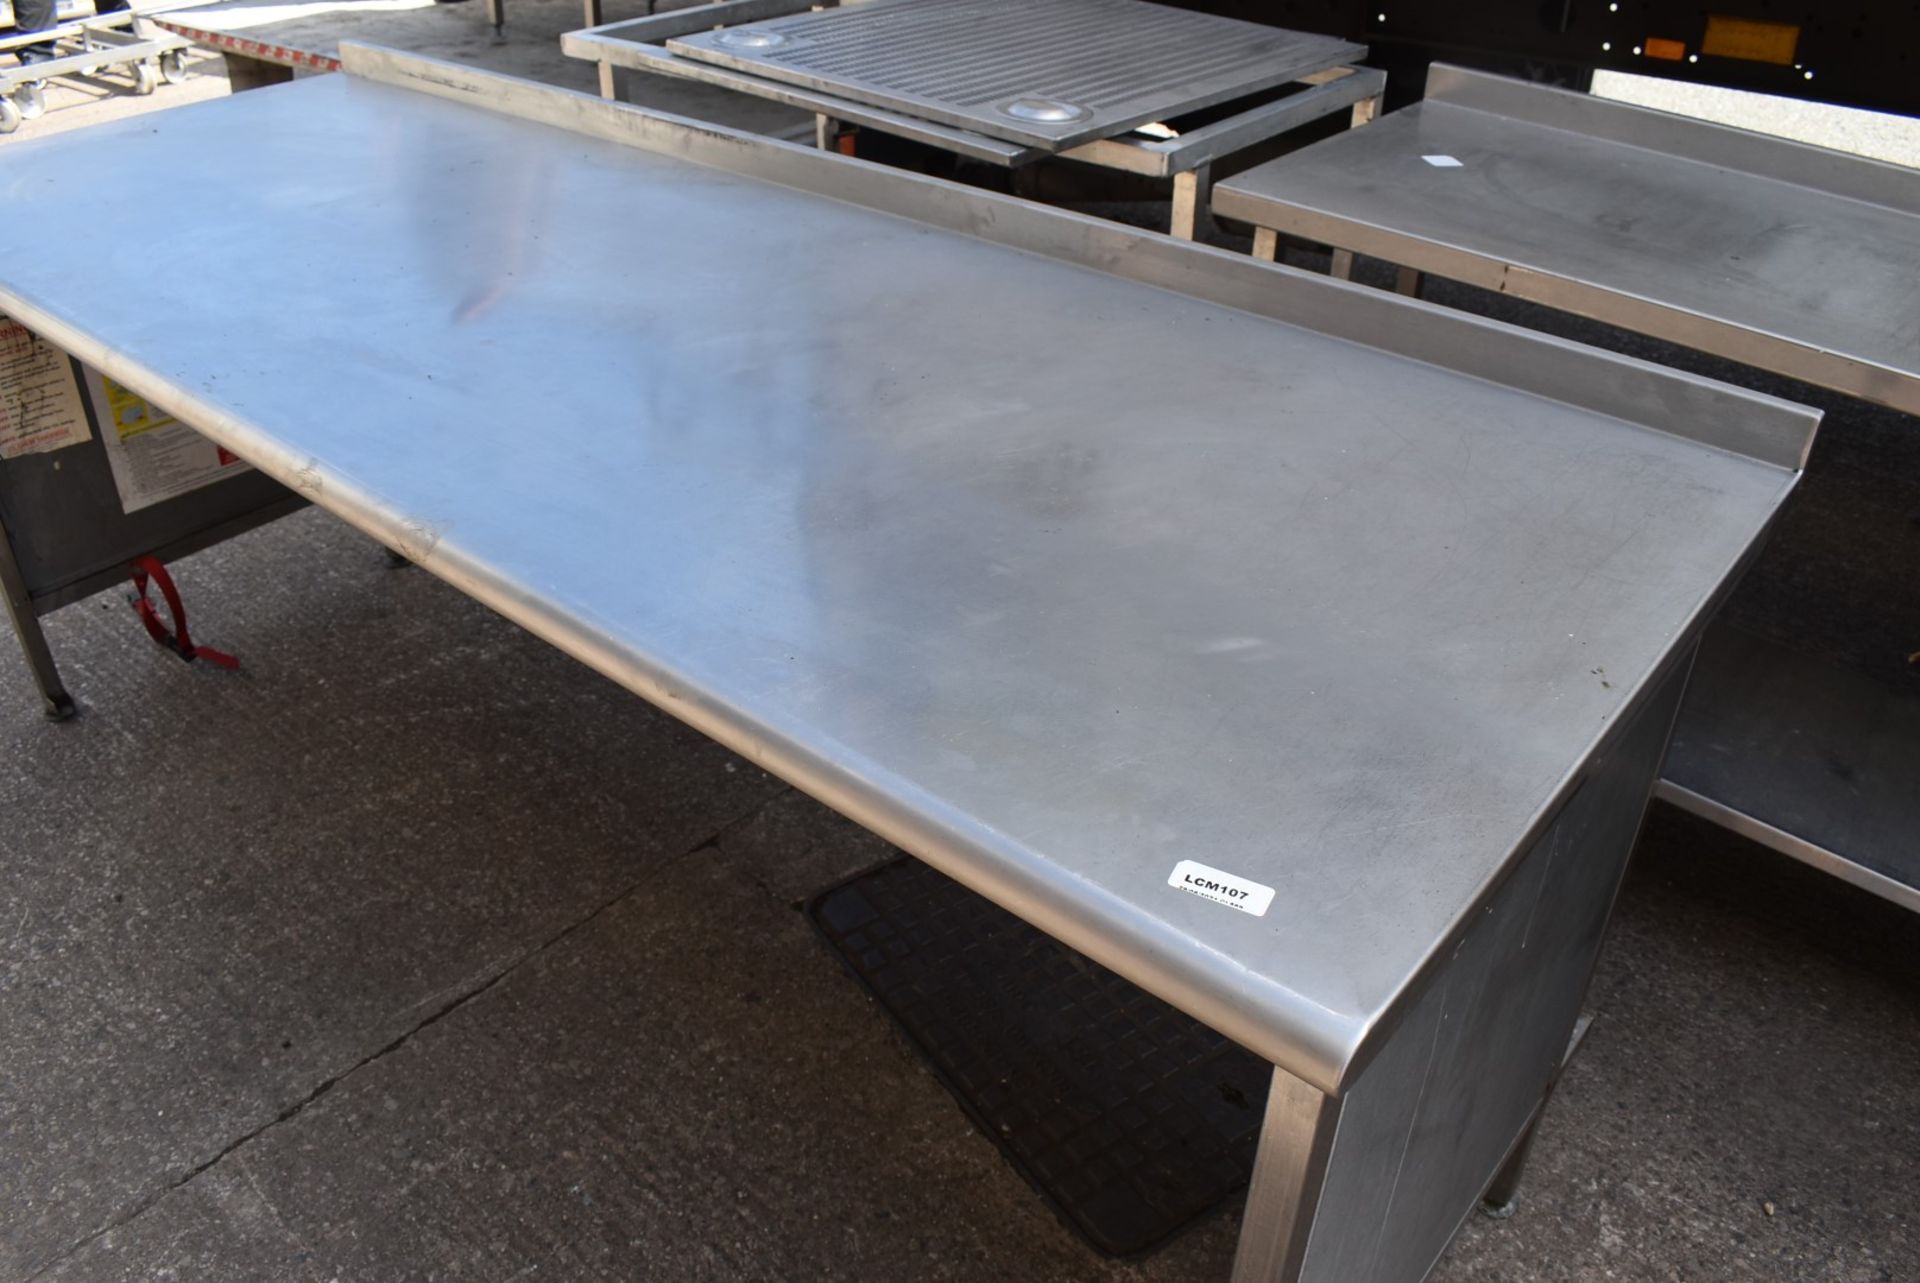 1 x Stainless Steel Prep Table With Closed Back and Sides - Dimensions: H87 x W200 x D80 cms - - Image 5 of 7